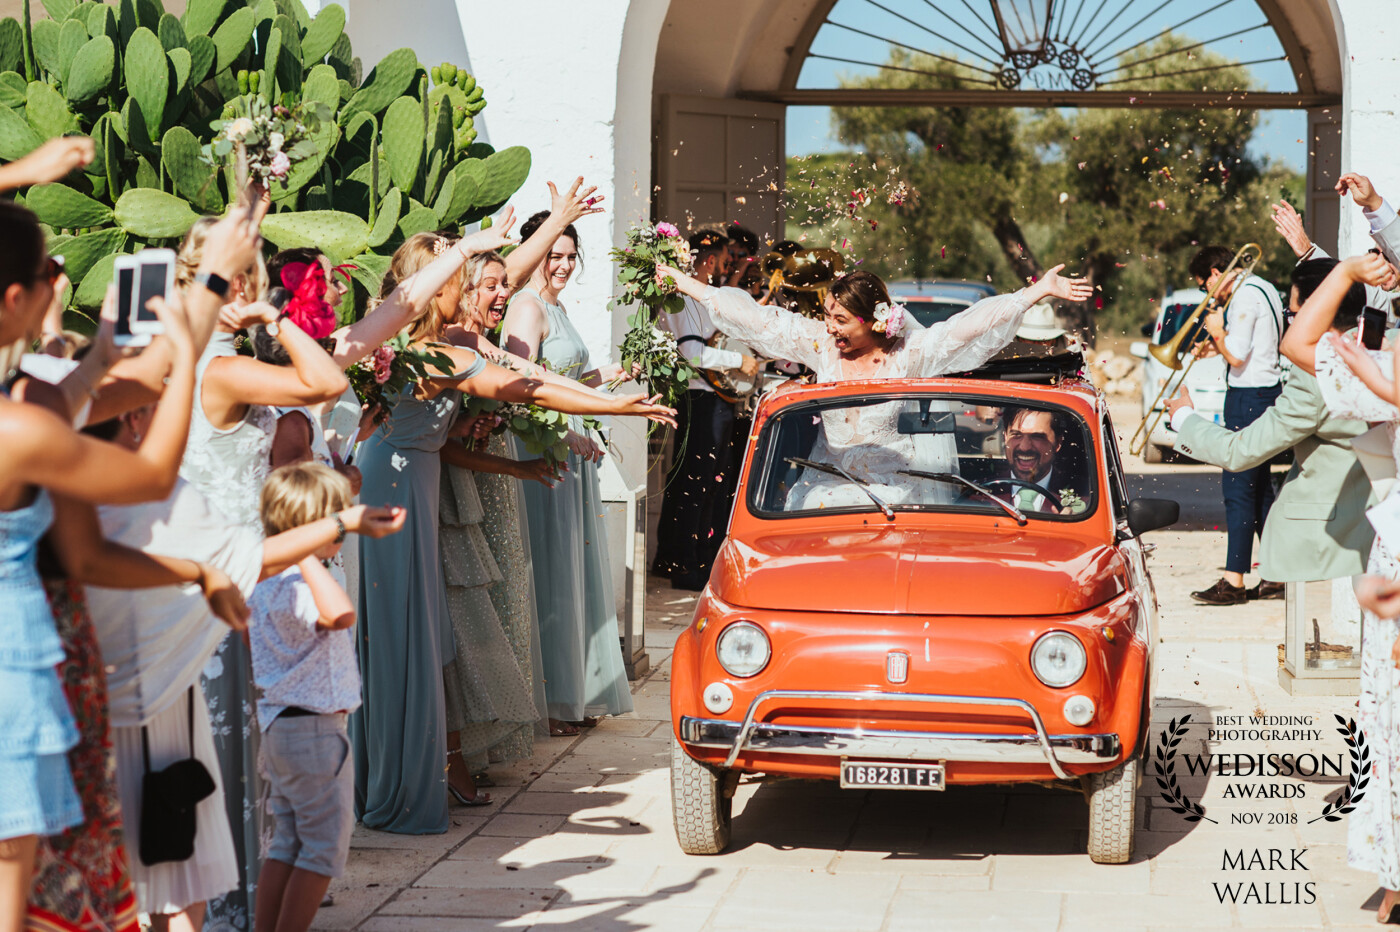 I've seen some brave attempts to limit the carnage caused by confetti, but none as bold as this couple's approach. With a wedding at Masseria Potenti in Puglia, Italy what better way to run the confetti gauntlet than in a vintage Fiat 500?! Obviously there was a lot of faith placed in the groom's ability to control his right foot when standing in my usual spot in front of the approaching couple!